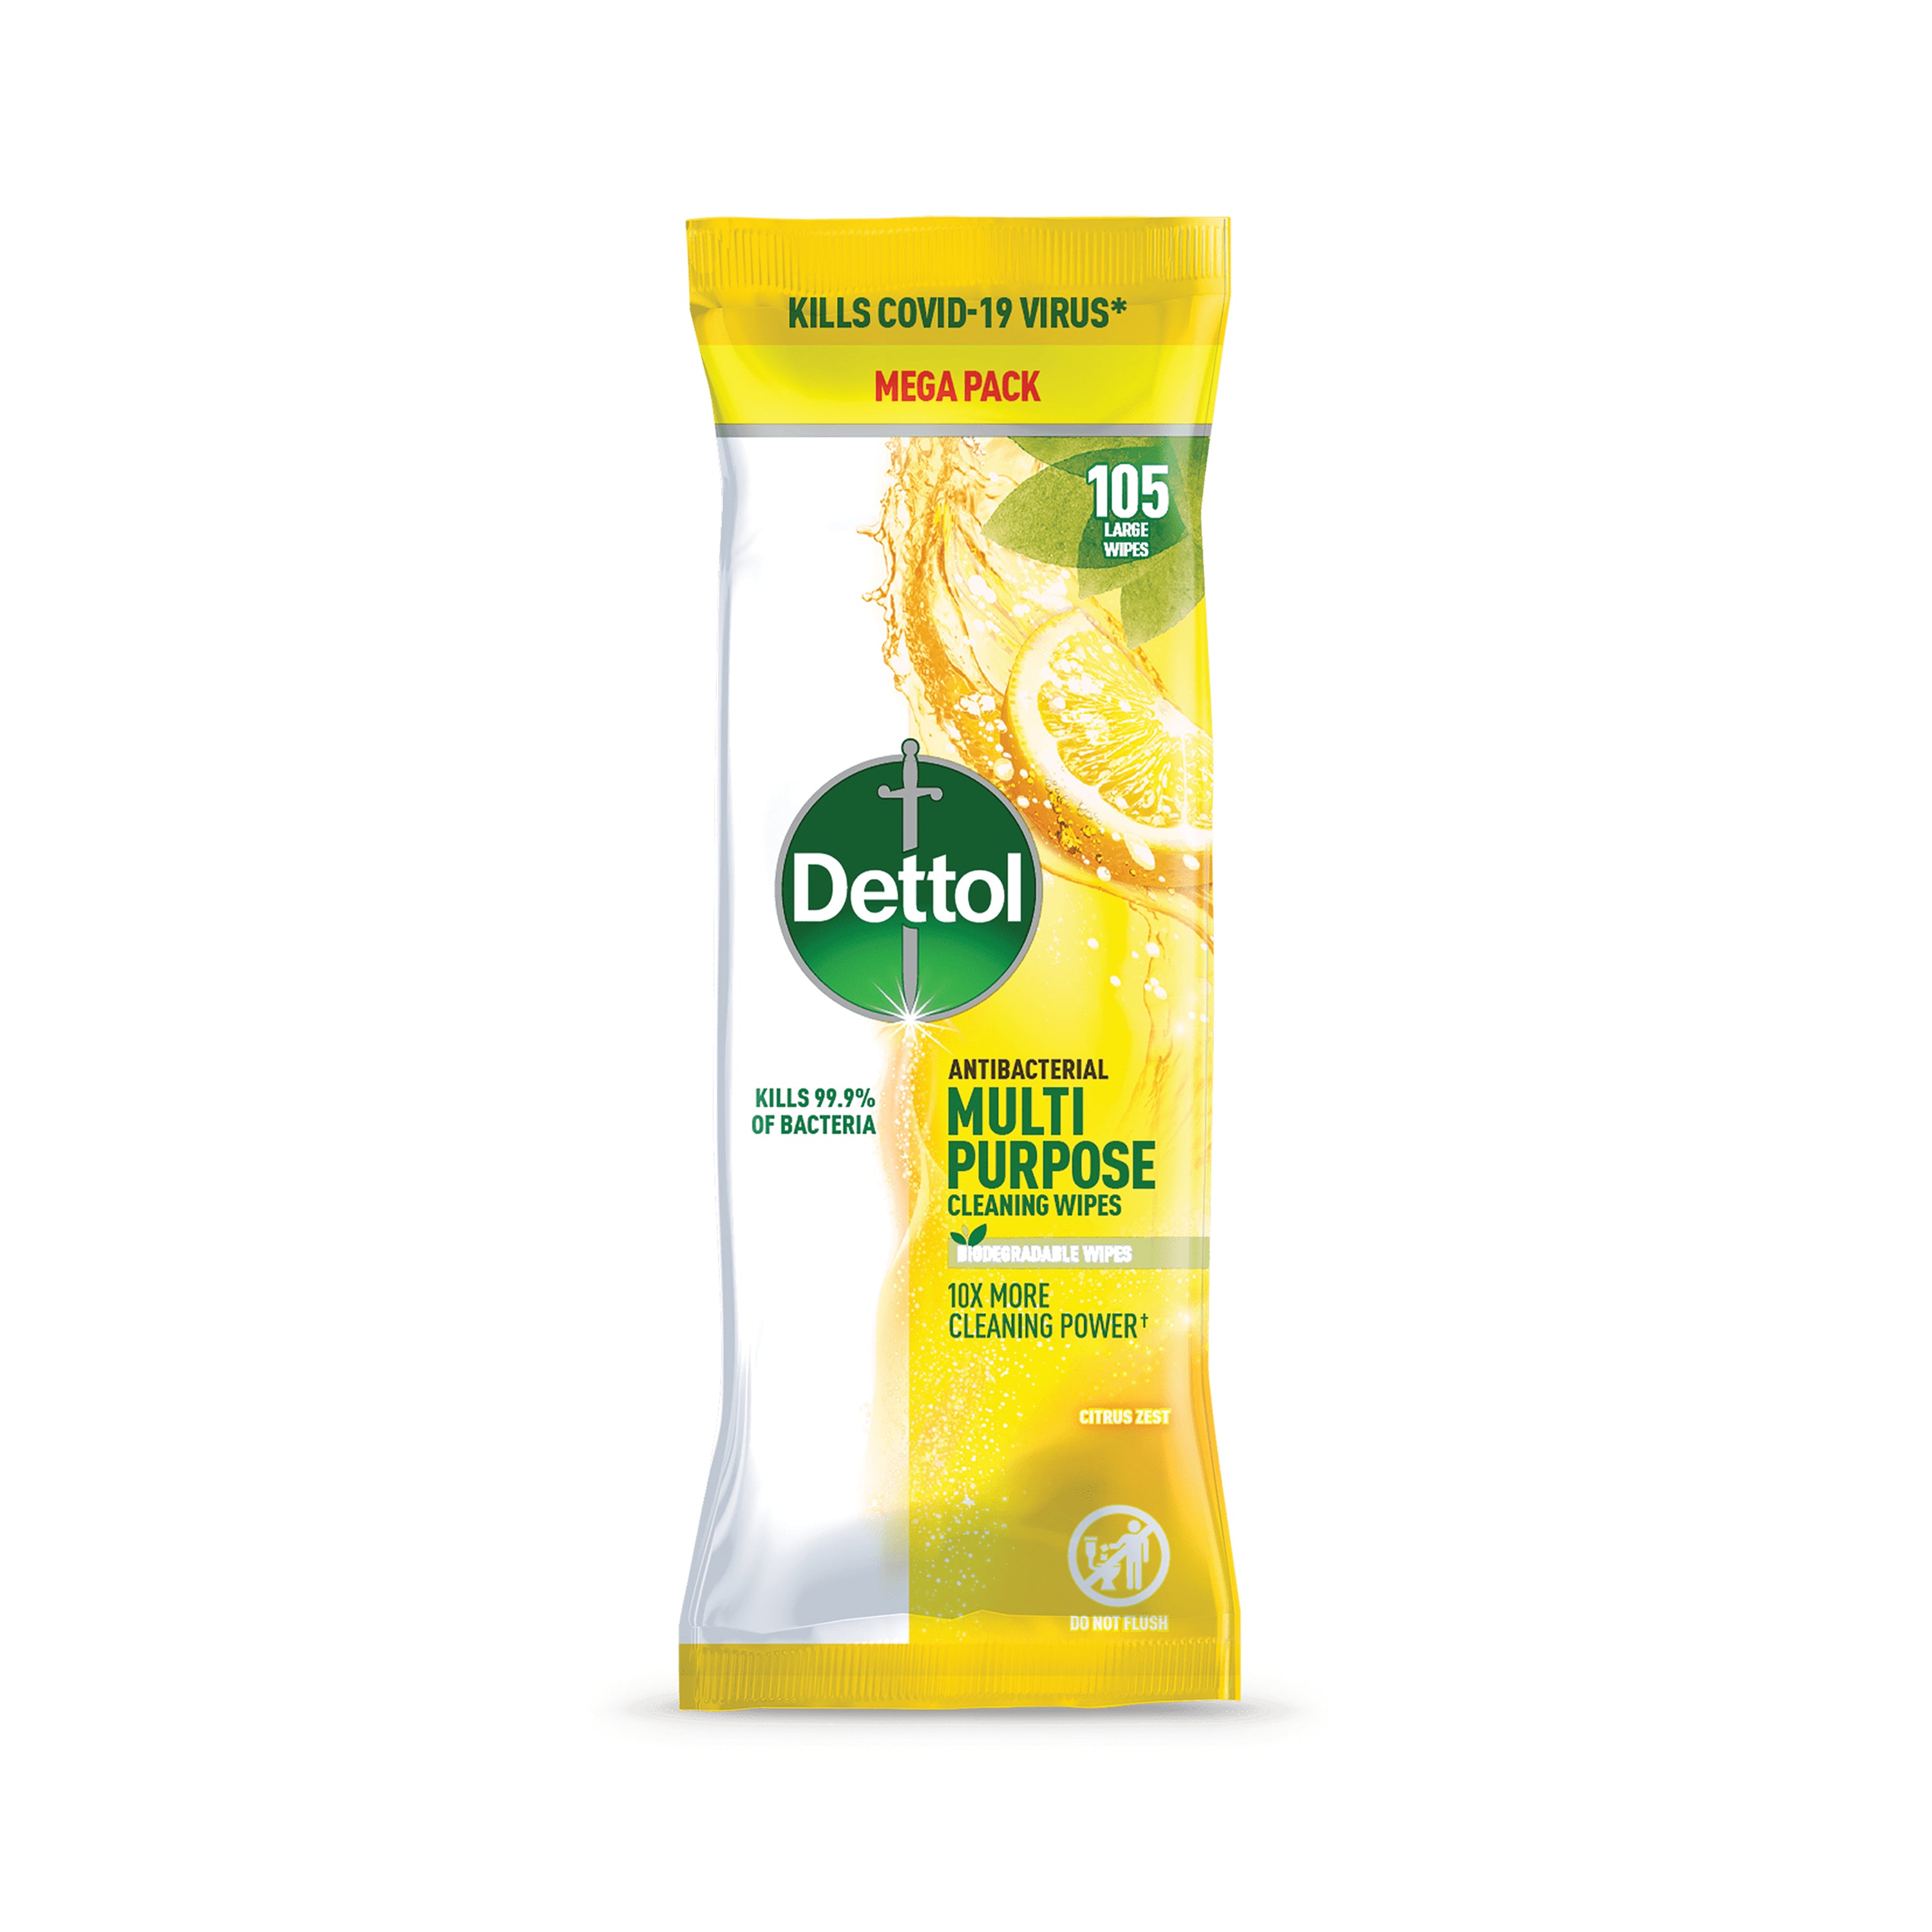 Dettol Antibacterial Multipurpose Cleaning Wipes 105 Large Wipes Citrus Zest (Pack of 3) 3124900